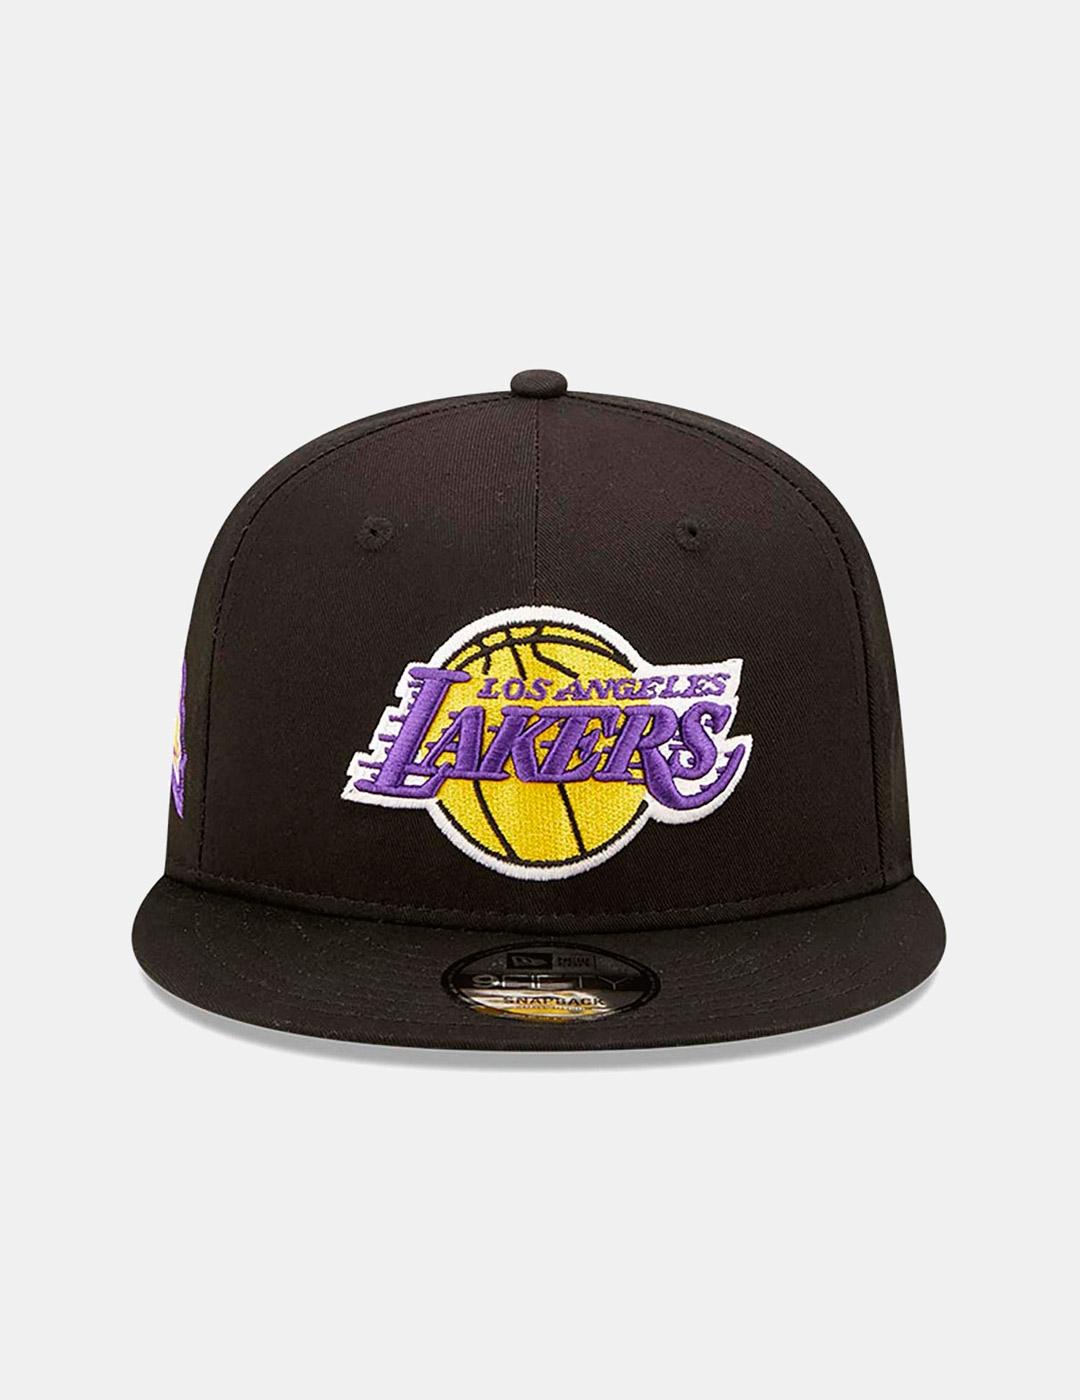 Gorra NEW ERA 9FIFTY SIDE PATCH LAKERS - Black